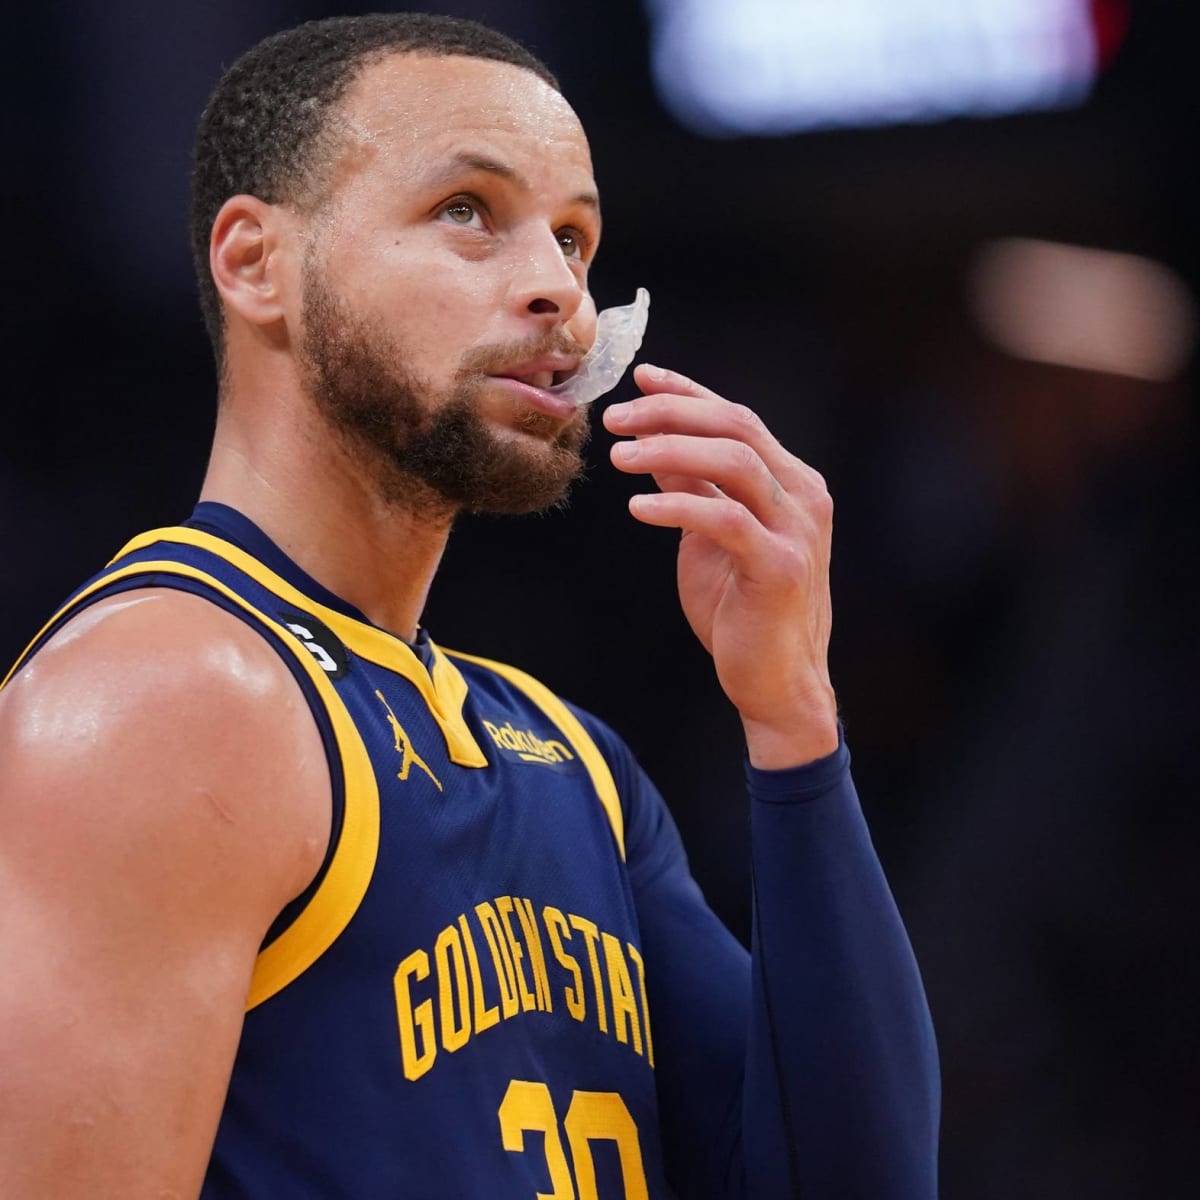 Steph Curry undergoes MRI, out for Warriors' game vs. Timberwolves